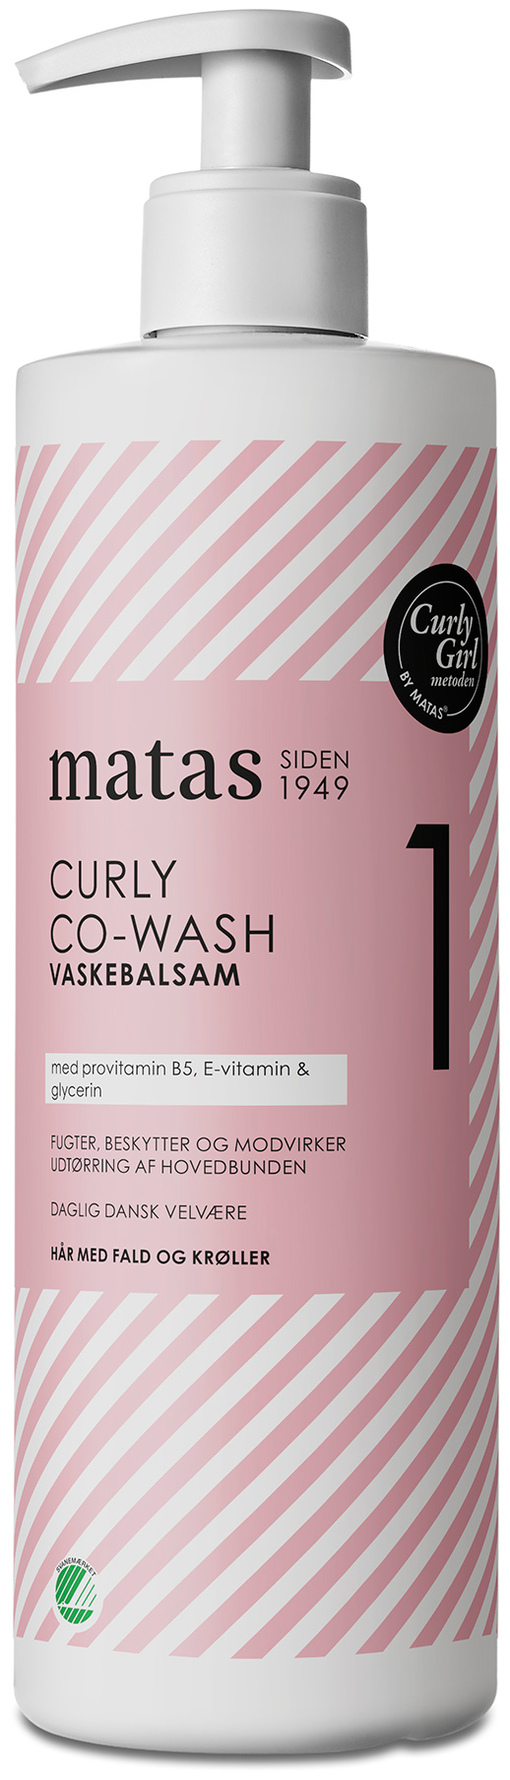 Køb Curly Co-Wash - Matas